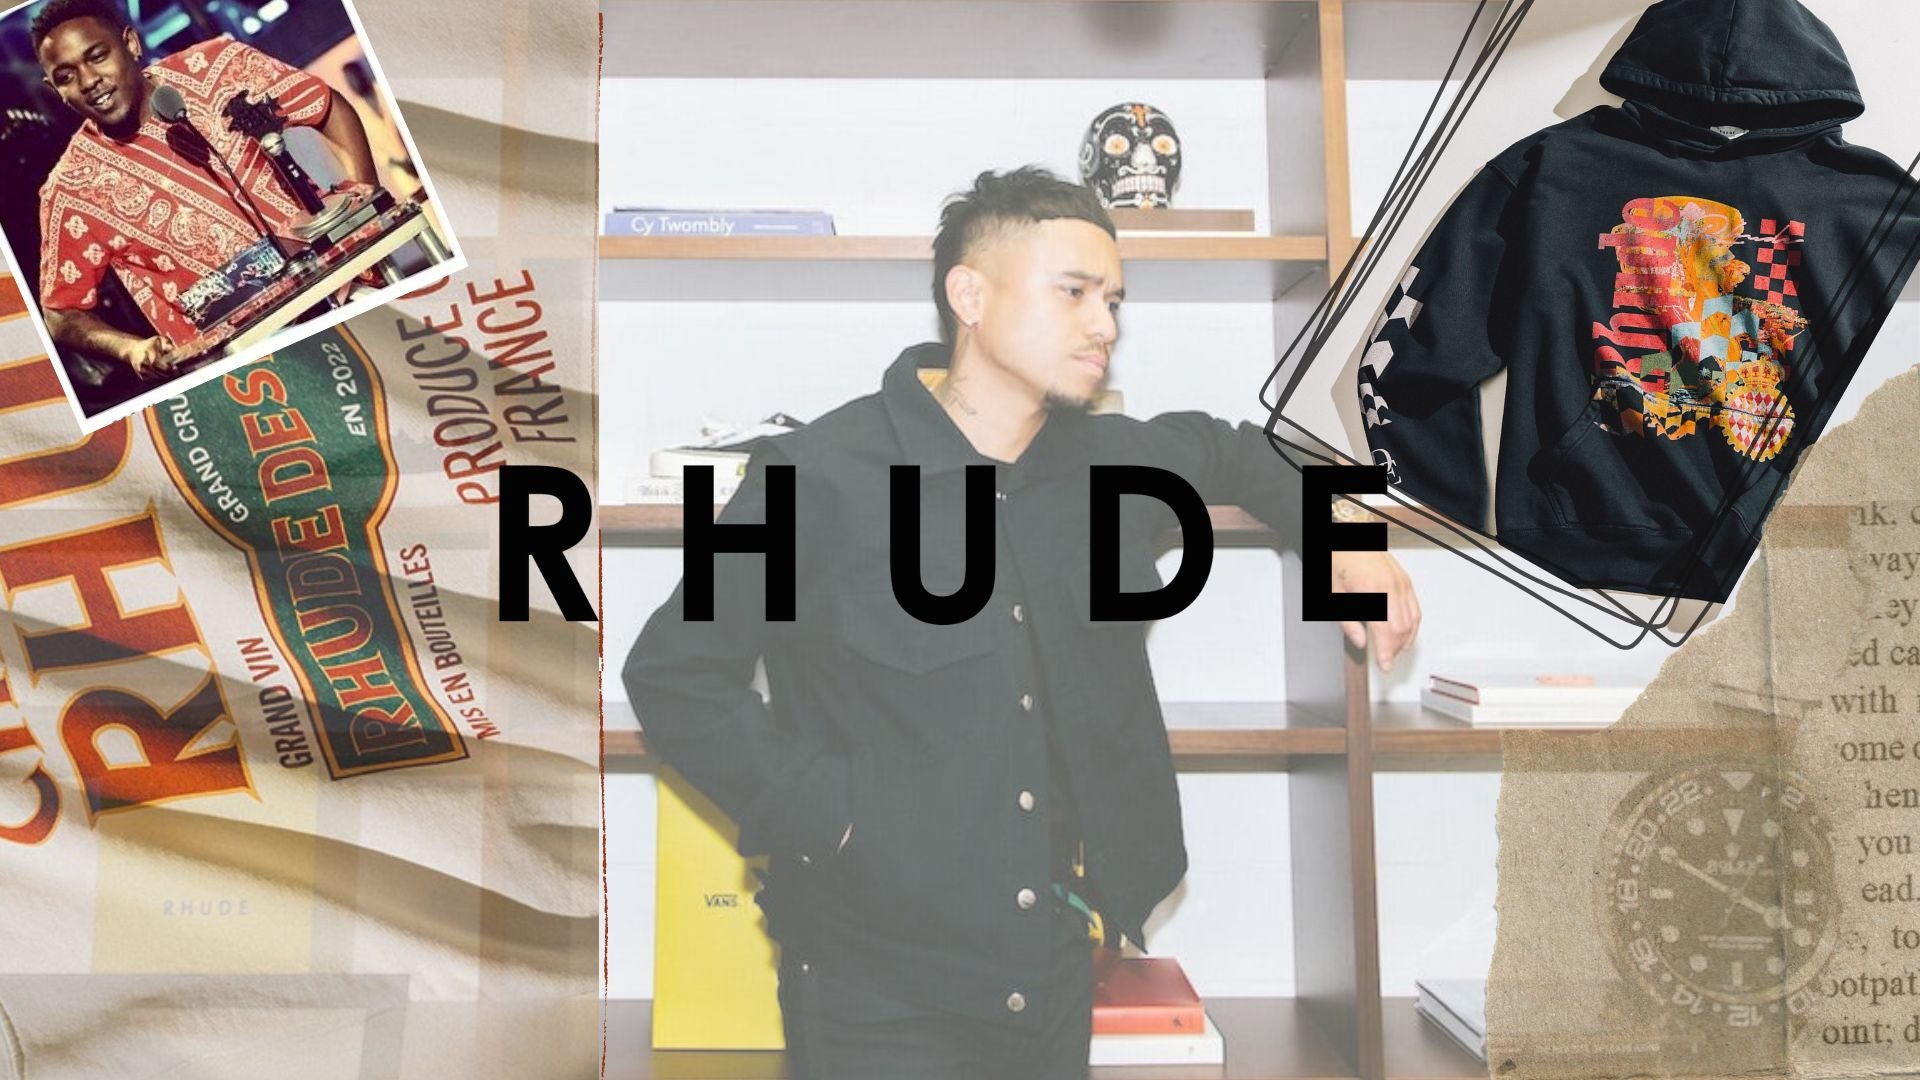 AMERICAN ICONOGRAPHY AND STREET CULTURE: RHUDE'S VISION